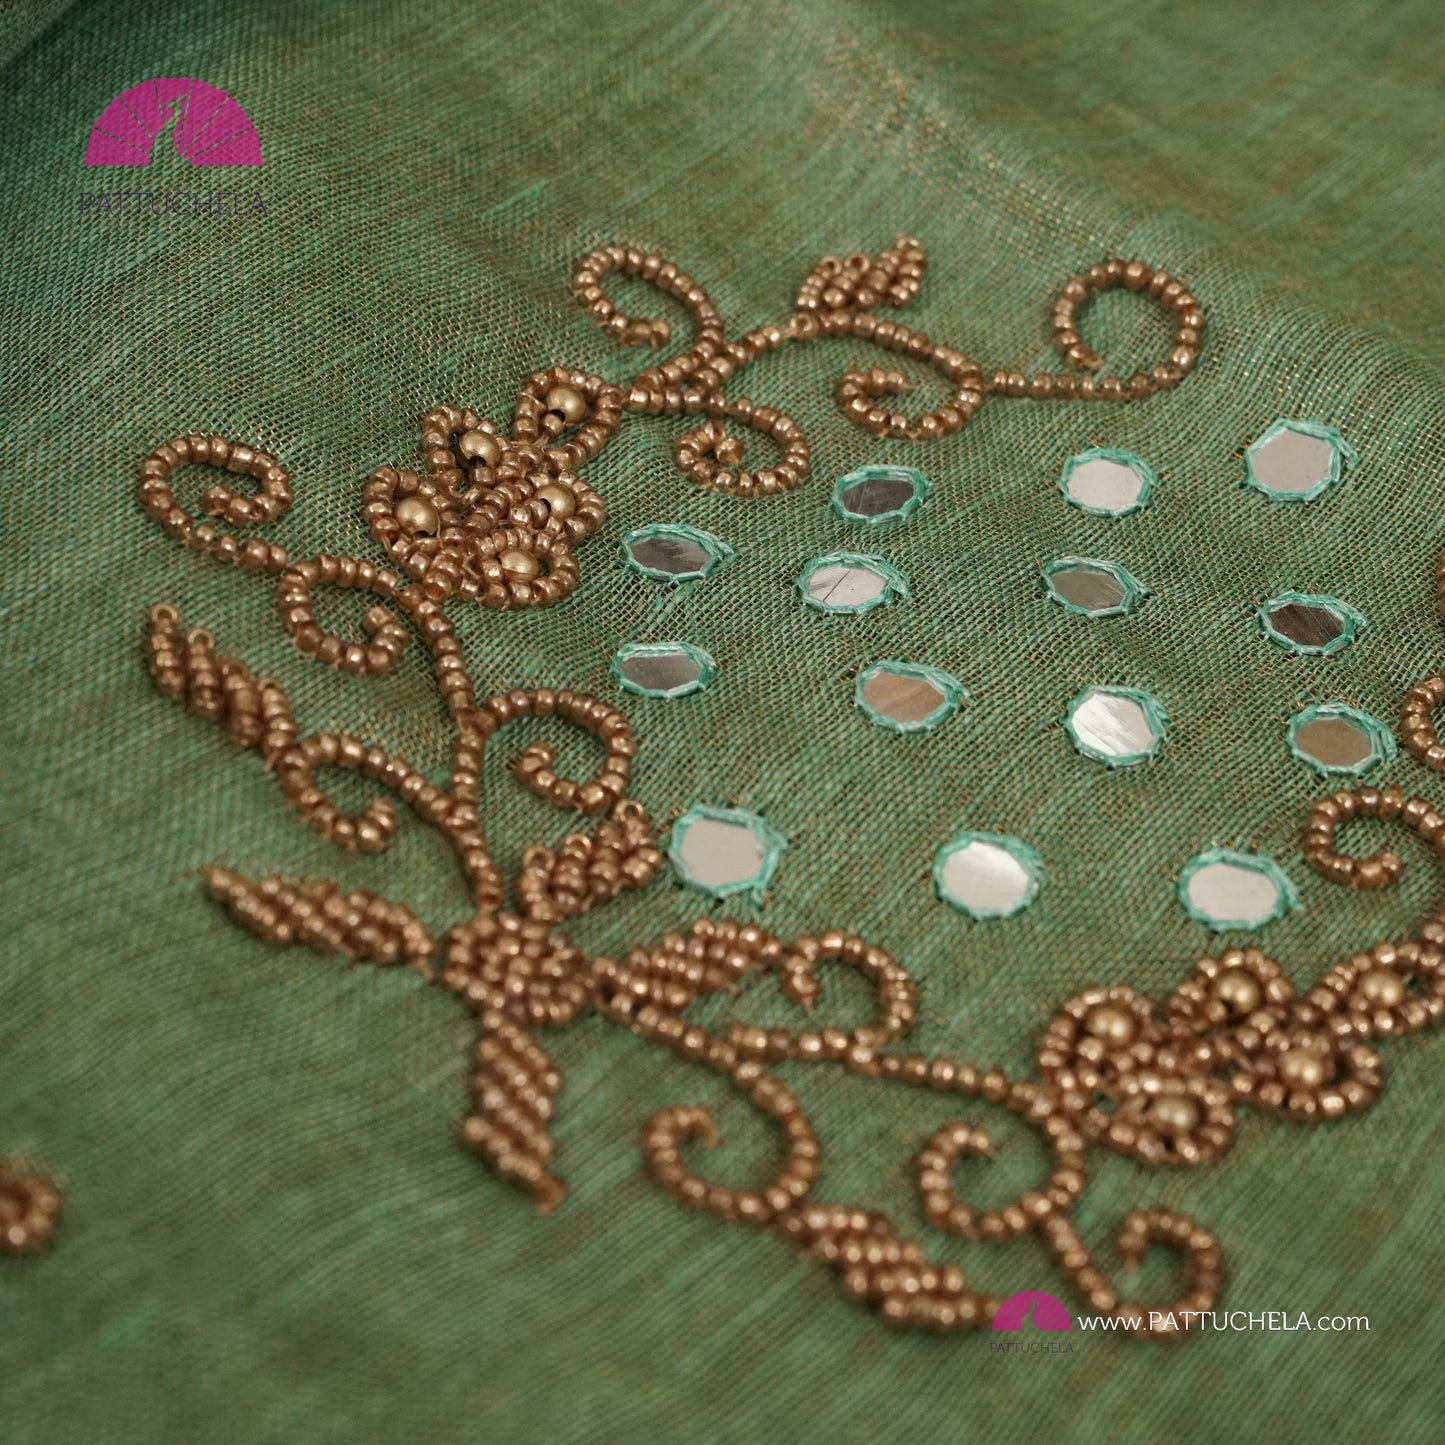 Organic Tissue Linen Saree in Pastel Green with Mirror Work and Hand Embroidery